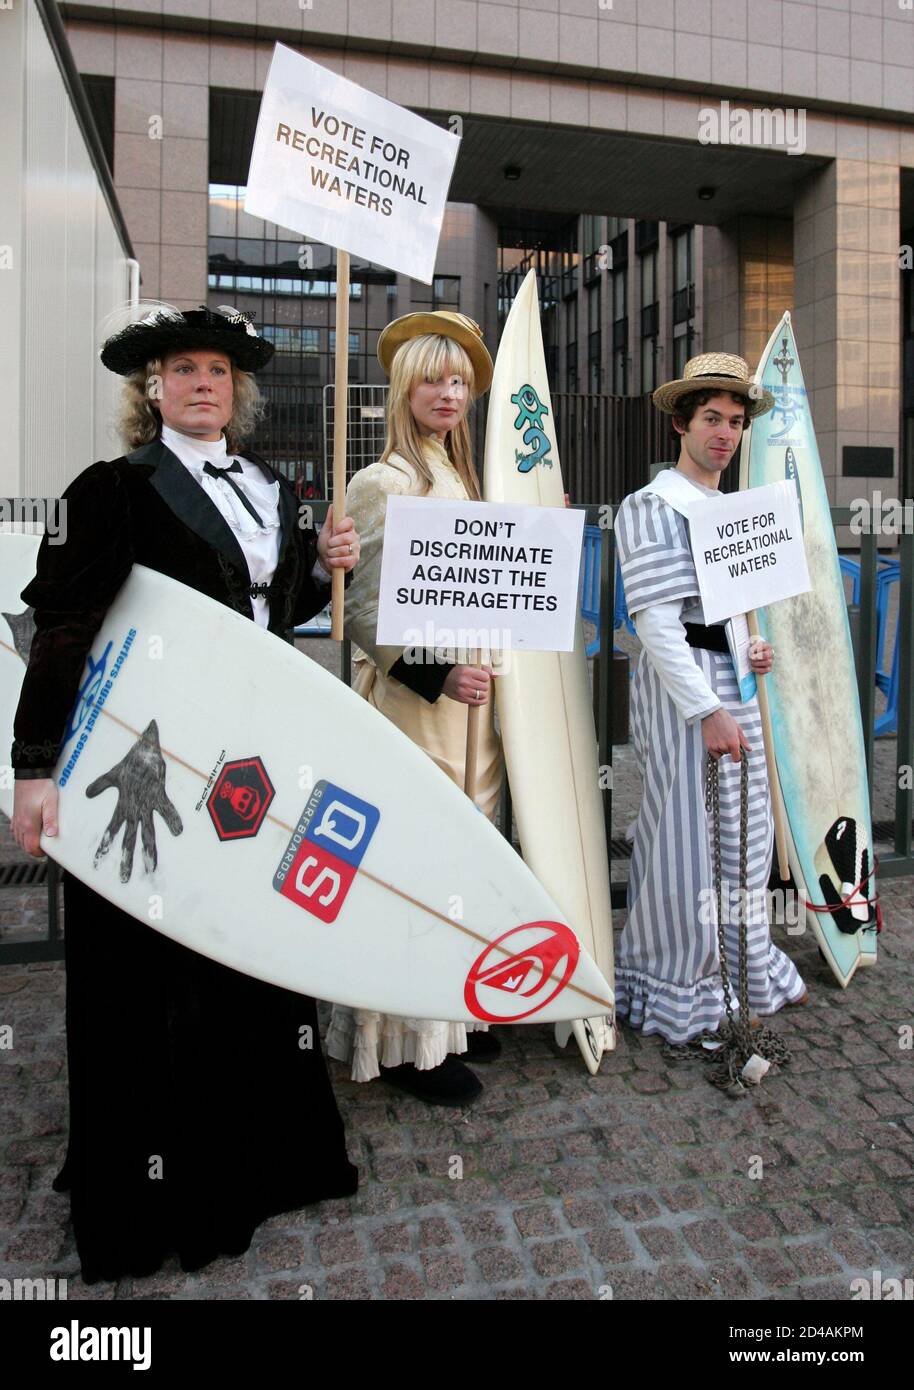 A group of surfers dressed in periode costume protest in front of the European Council building in Brussels December 20, 2004. Surfers Against Sewage activists protested to challenge EU environment ministers over unsatisfactory reforms to the EU Bathing Water Directive. REUTERS/Thierry Roge  THR/THI Stock Photo